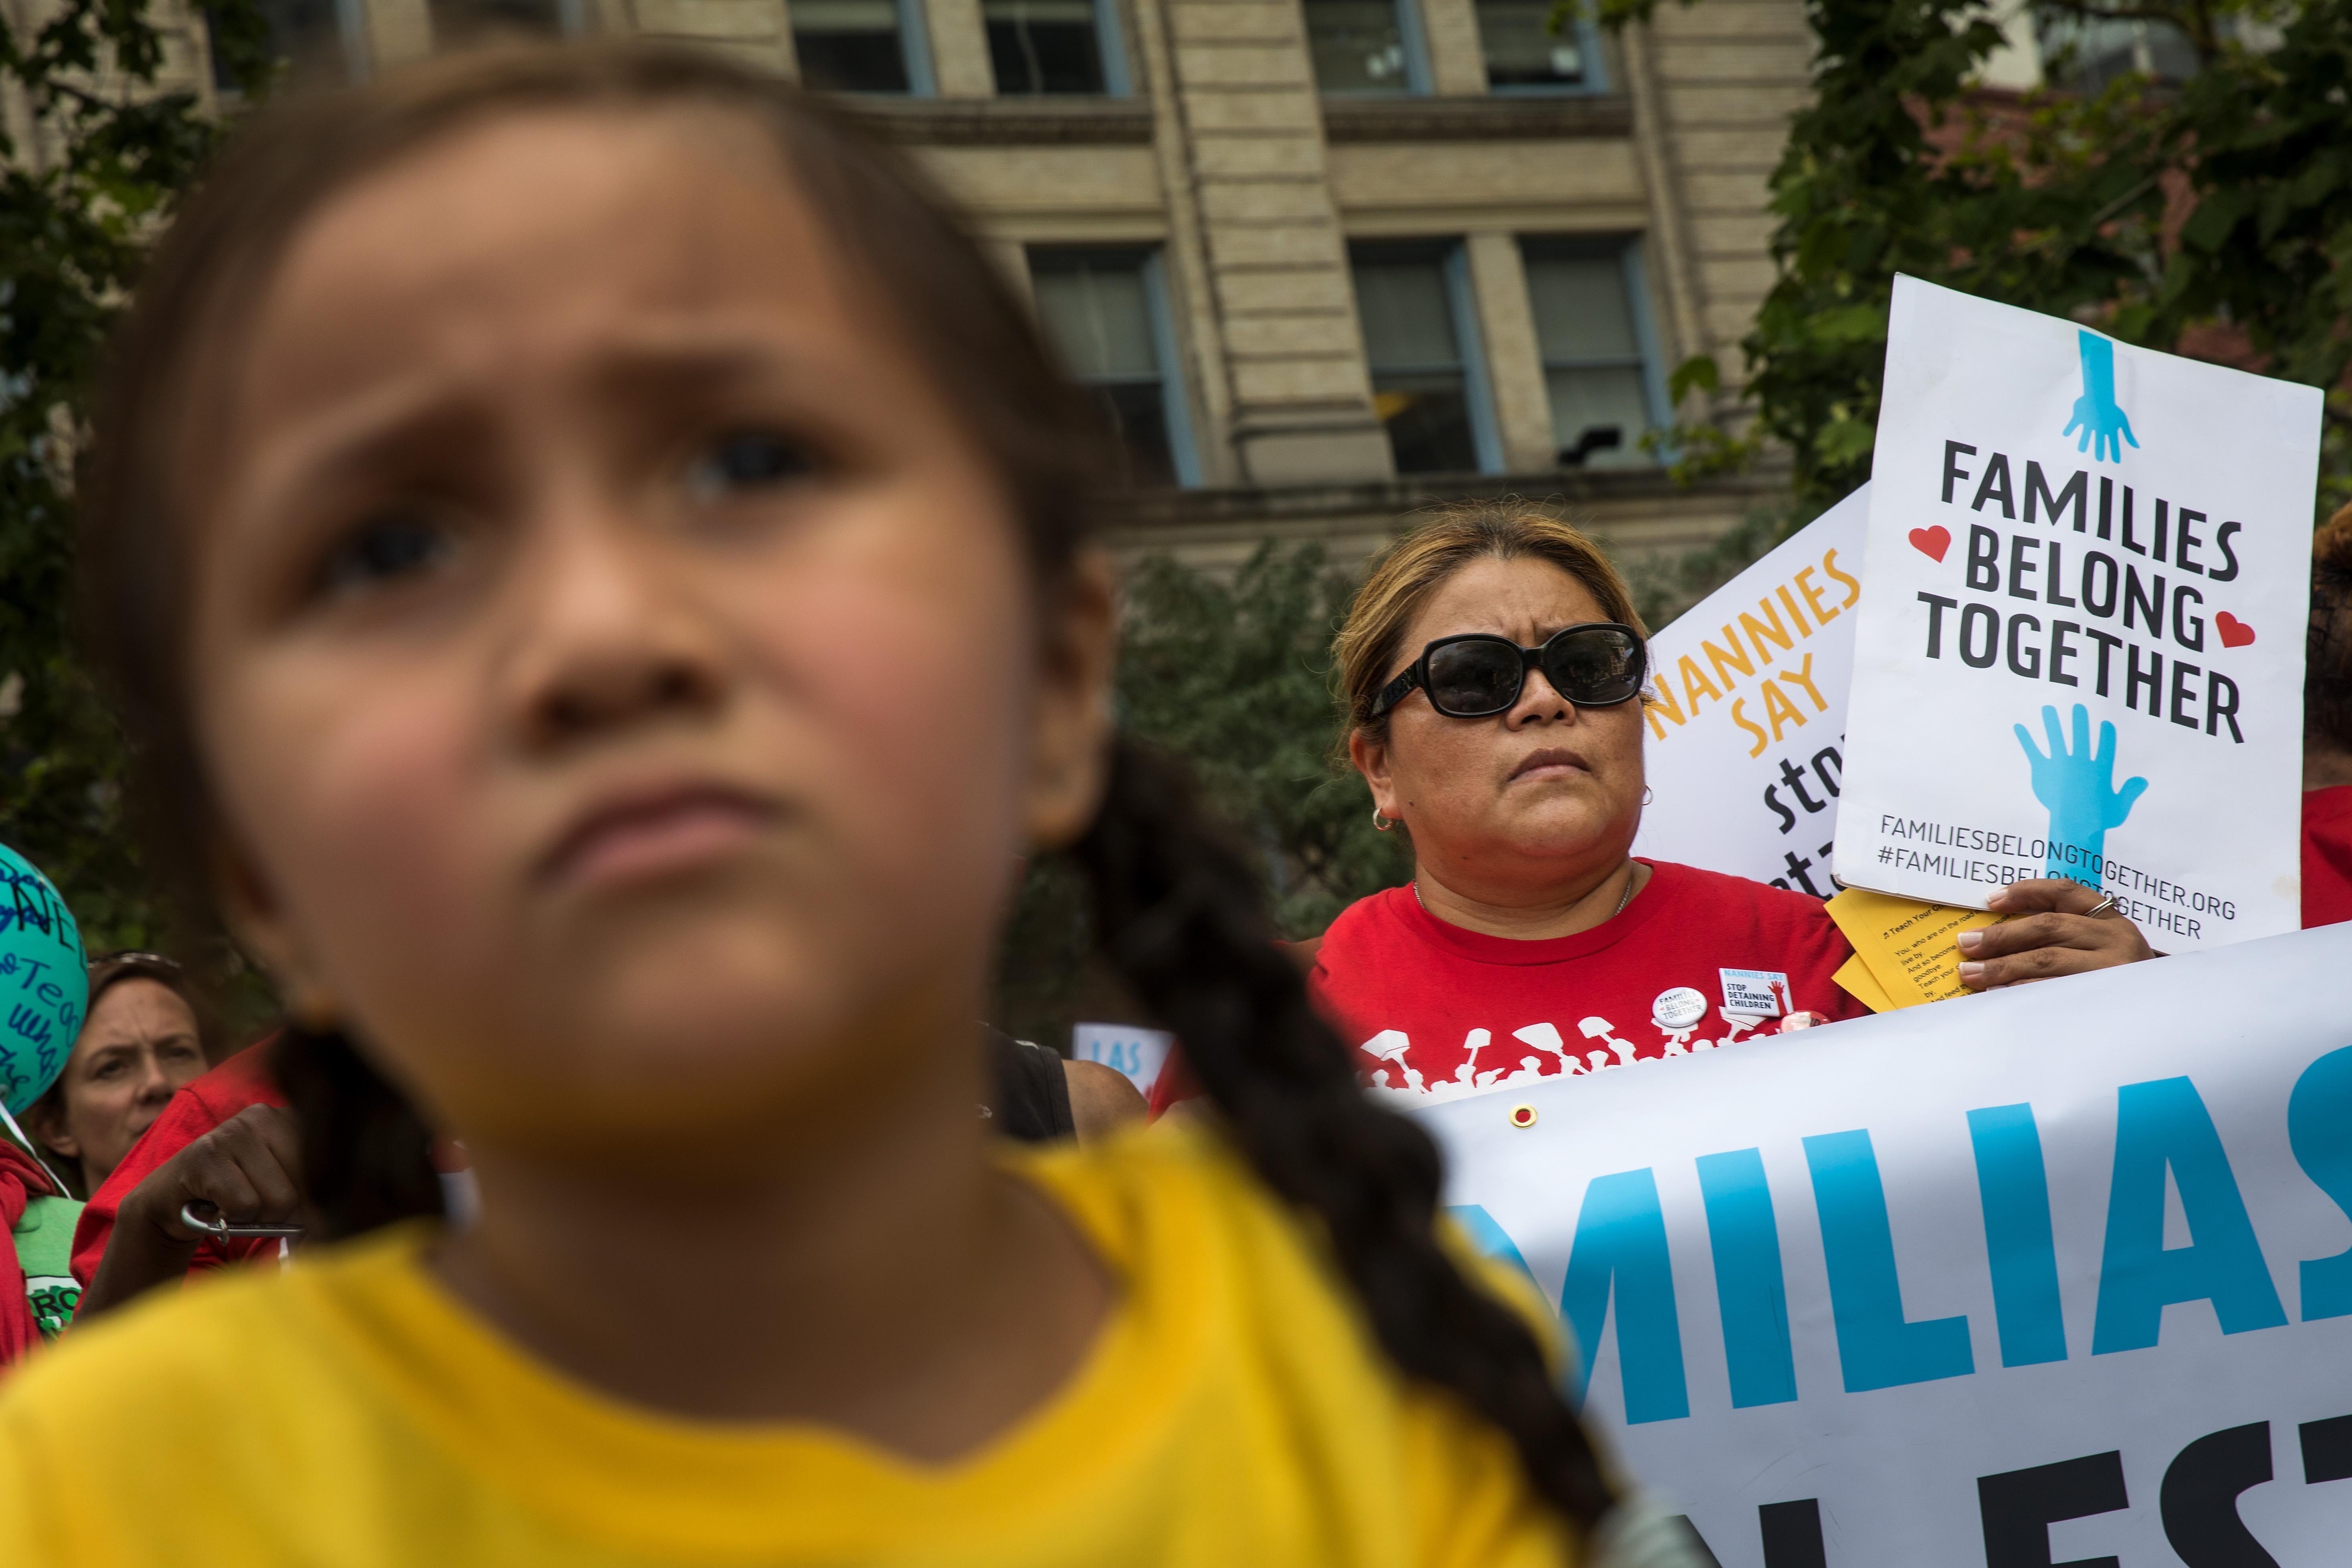 Activists, including childcare providers, parents and their children, protest against the Trump administrations recent family detention and separation policies for migrants along the southern border, near the New York offices of U.S. Immigration and Customs Enforcement.